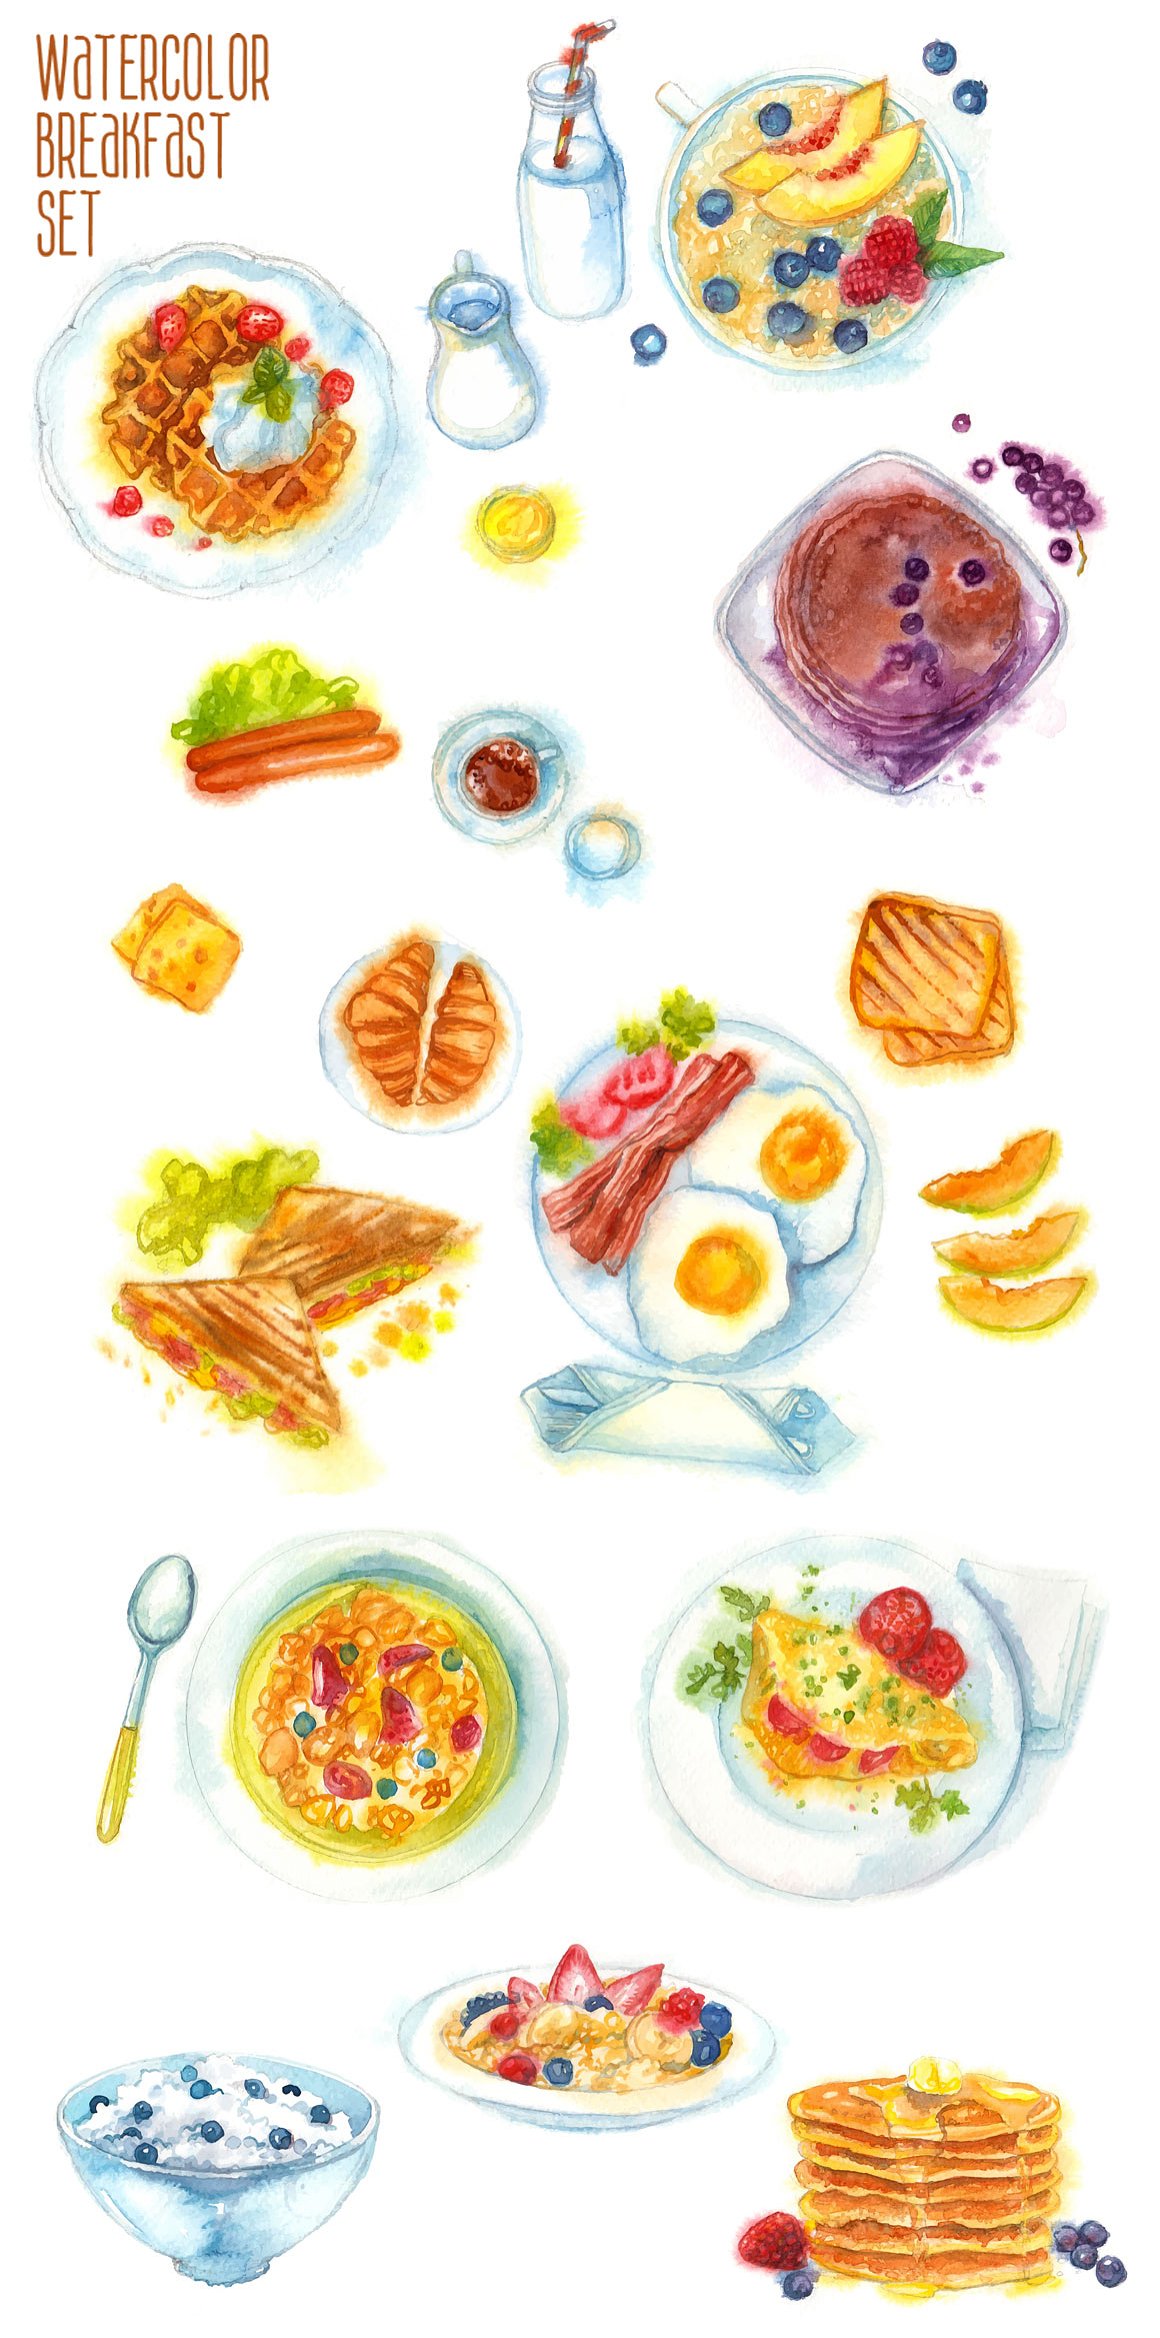 Croissant, eggs and other food.